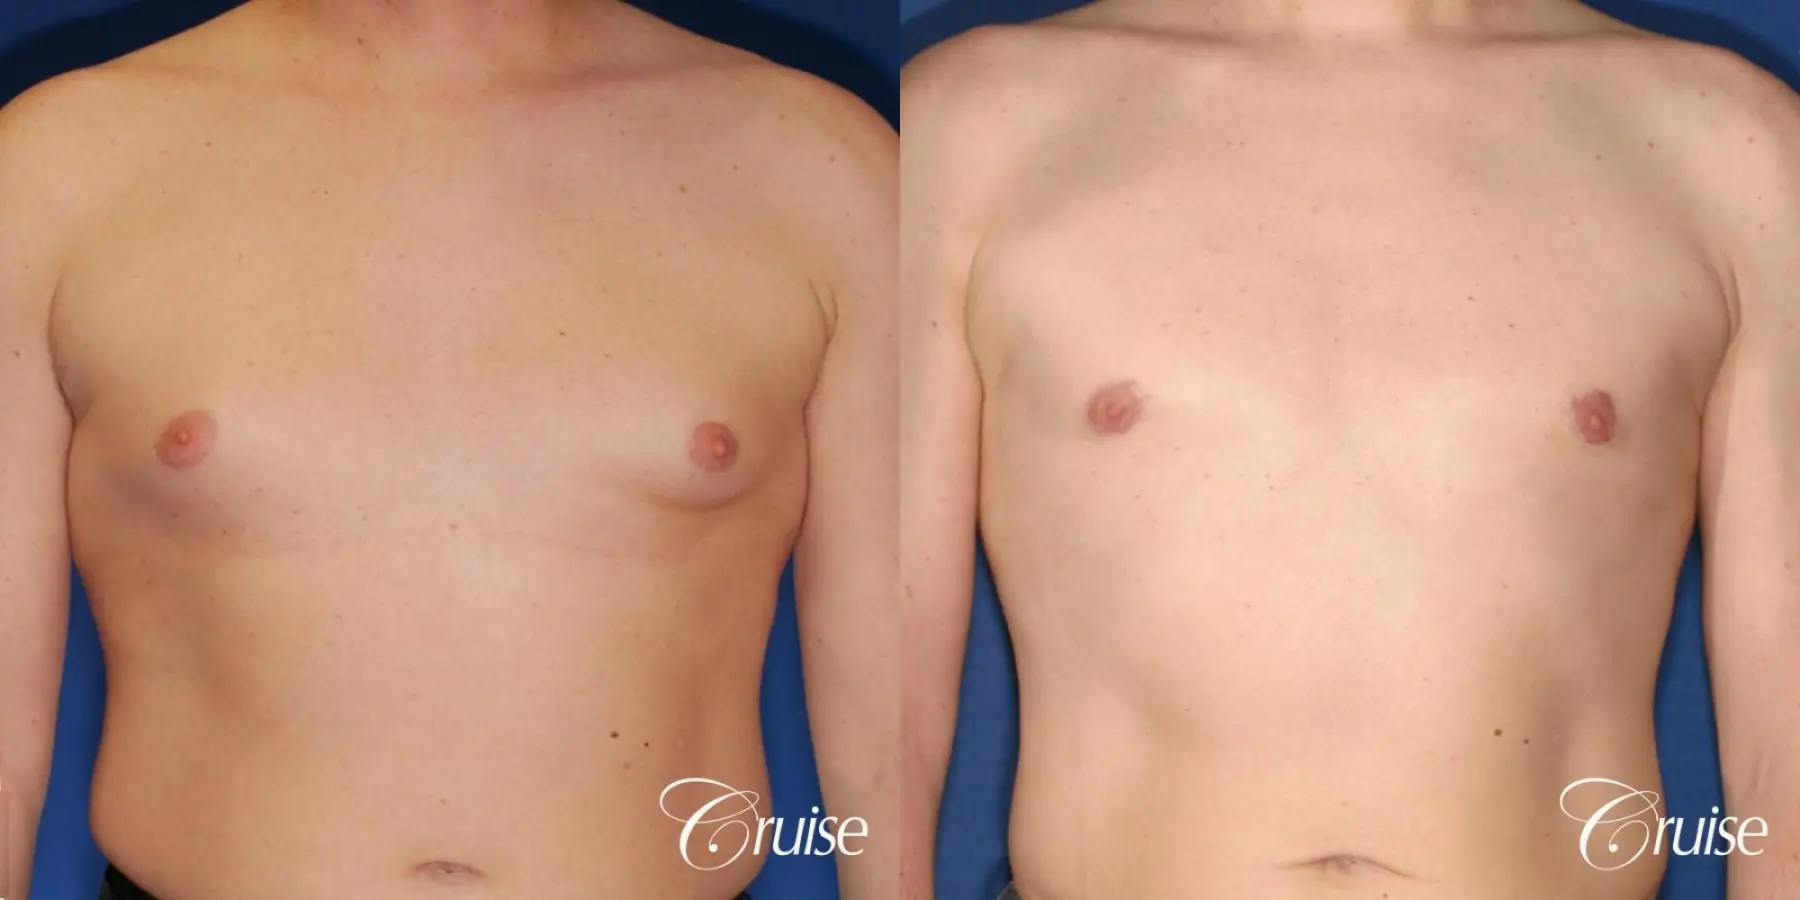 moderate gynecomastia on adult with donut lift scar - Before and After 1